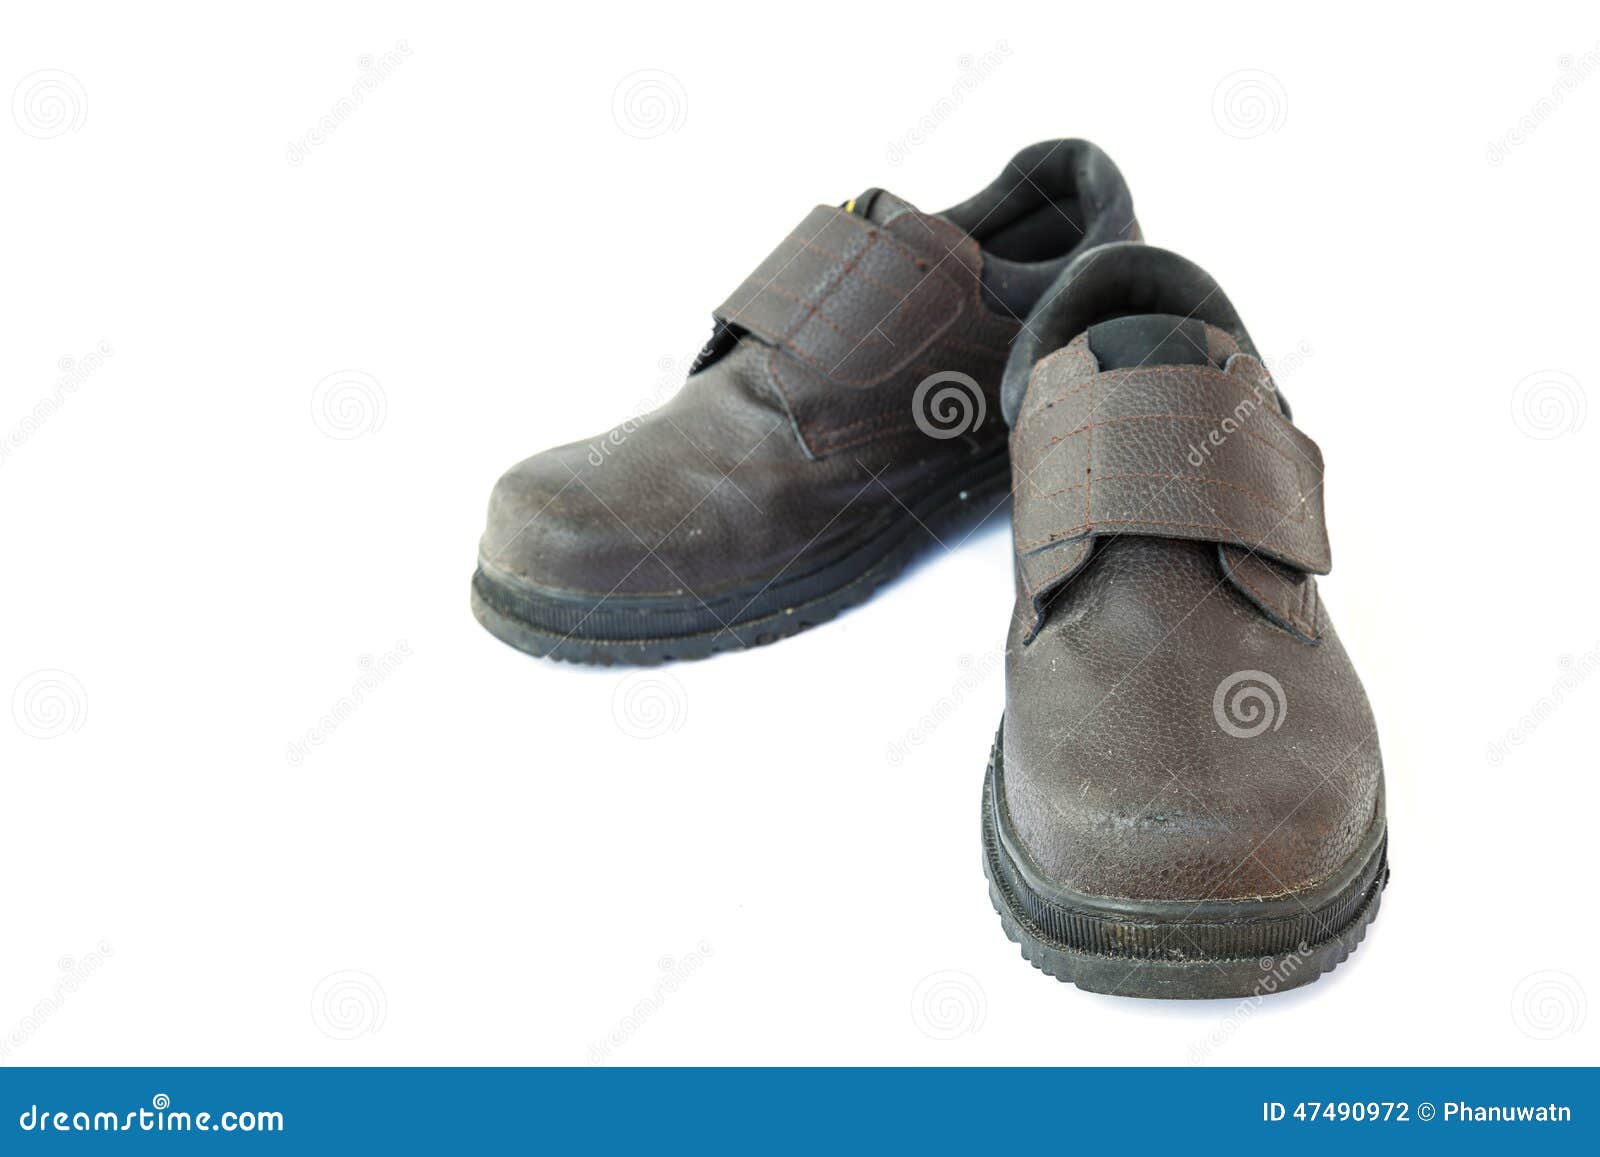 Old Safety Shoes Isolated on White Stock Photo - Image of black ...